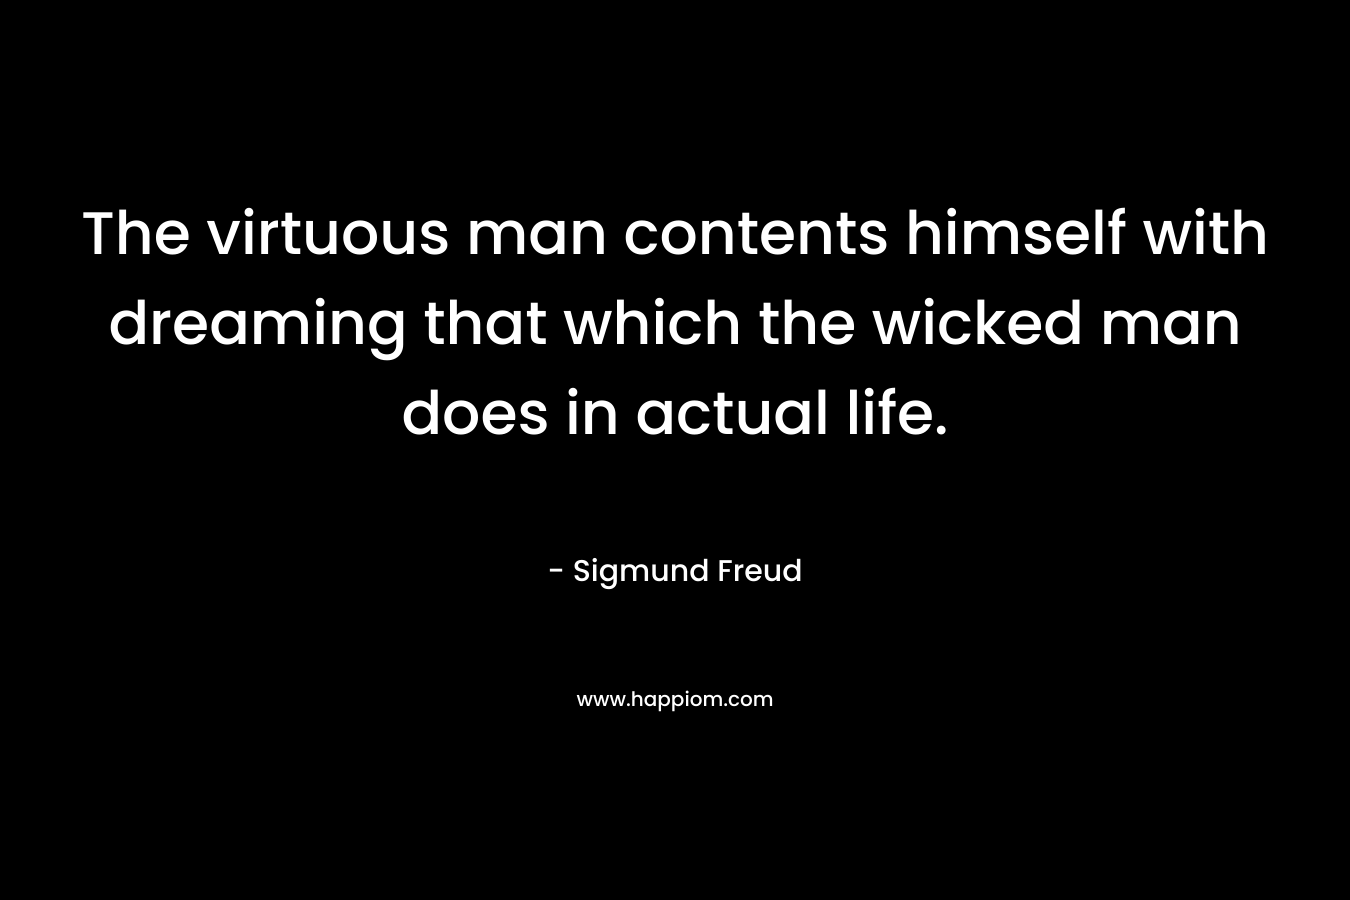 The virtuous man contents himself with dreaming that which the wicked man does in actual life.